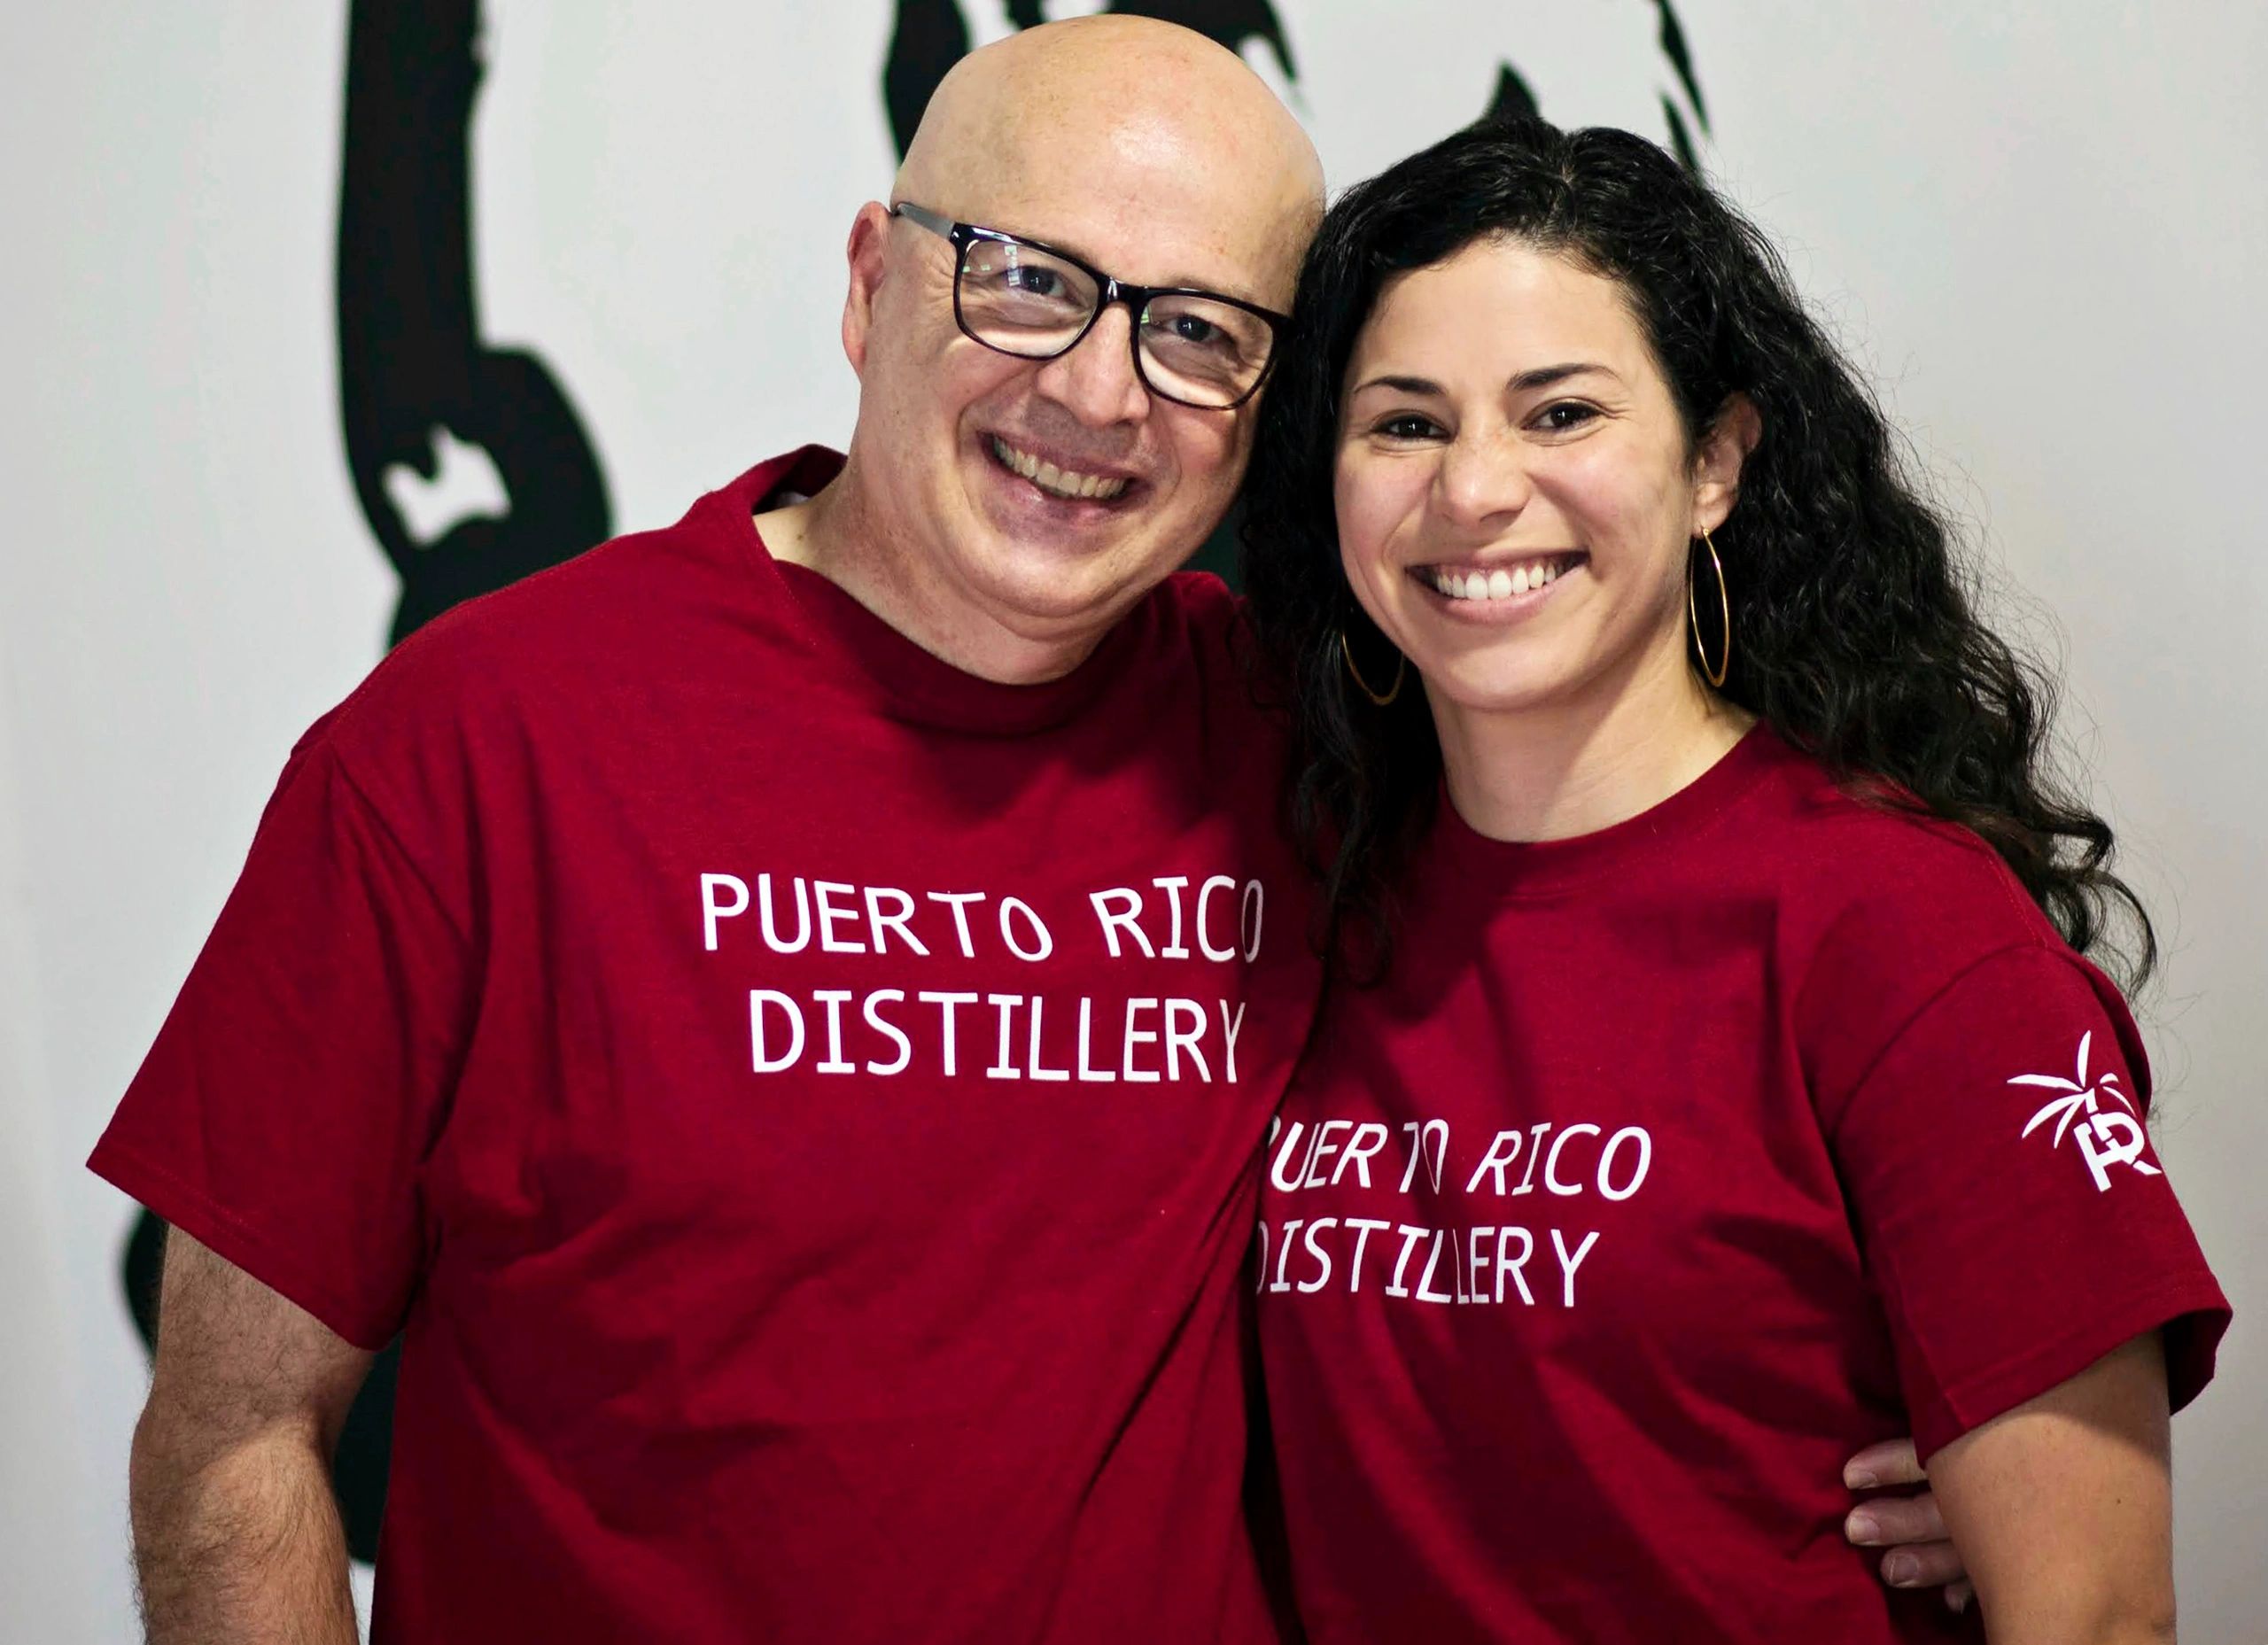 Ángel and Crystal are the father-daughter team behind Puerto Rico Distillery.